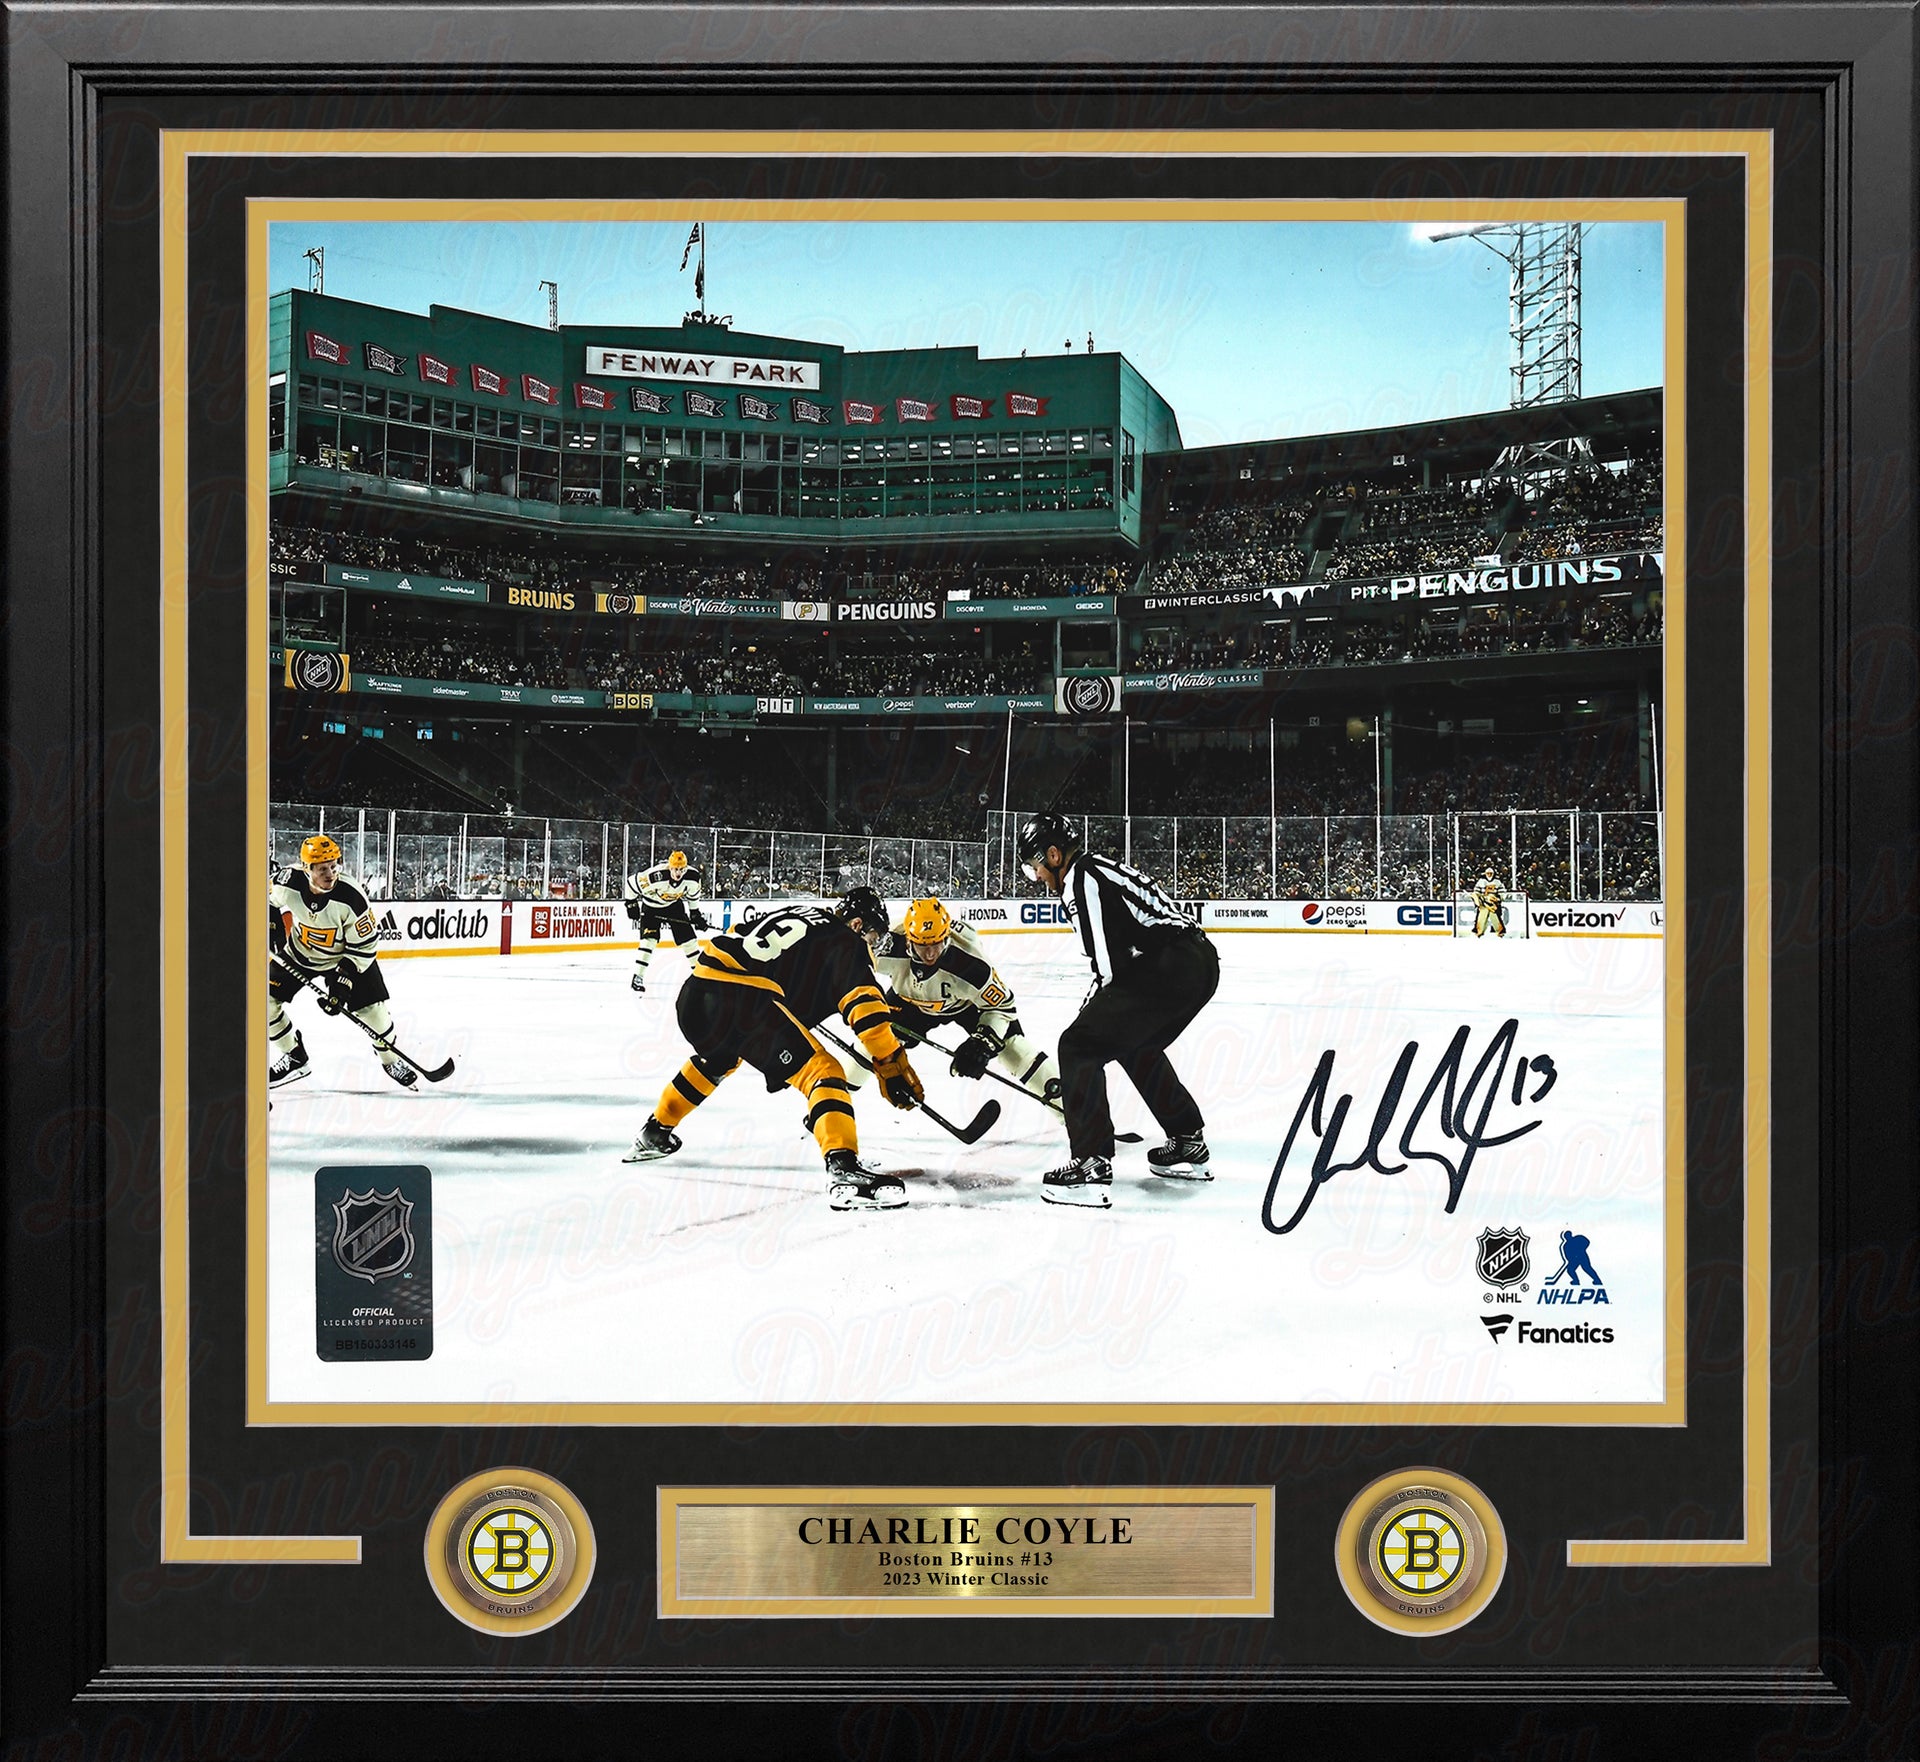 Charlie Coyle 2023 Winter Classic Boston Bruins Autographed 11" x 14" Framed Hockey Photo - Dynasty Sports & Framing 